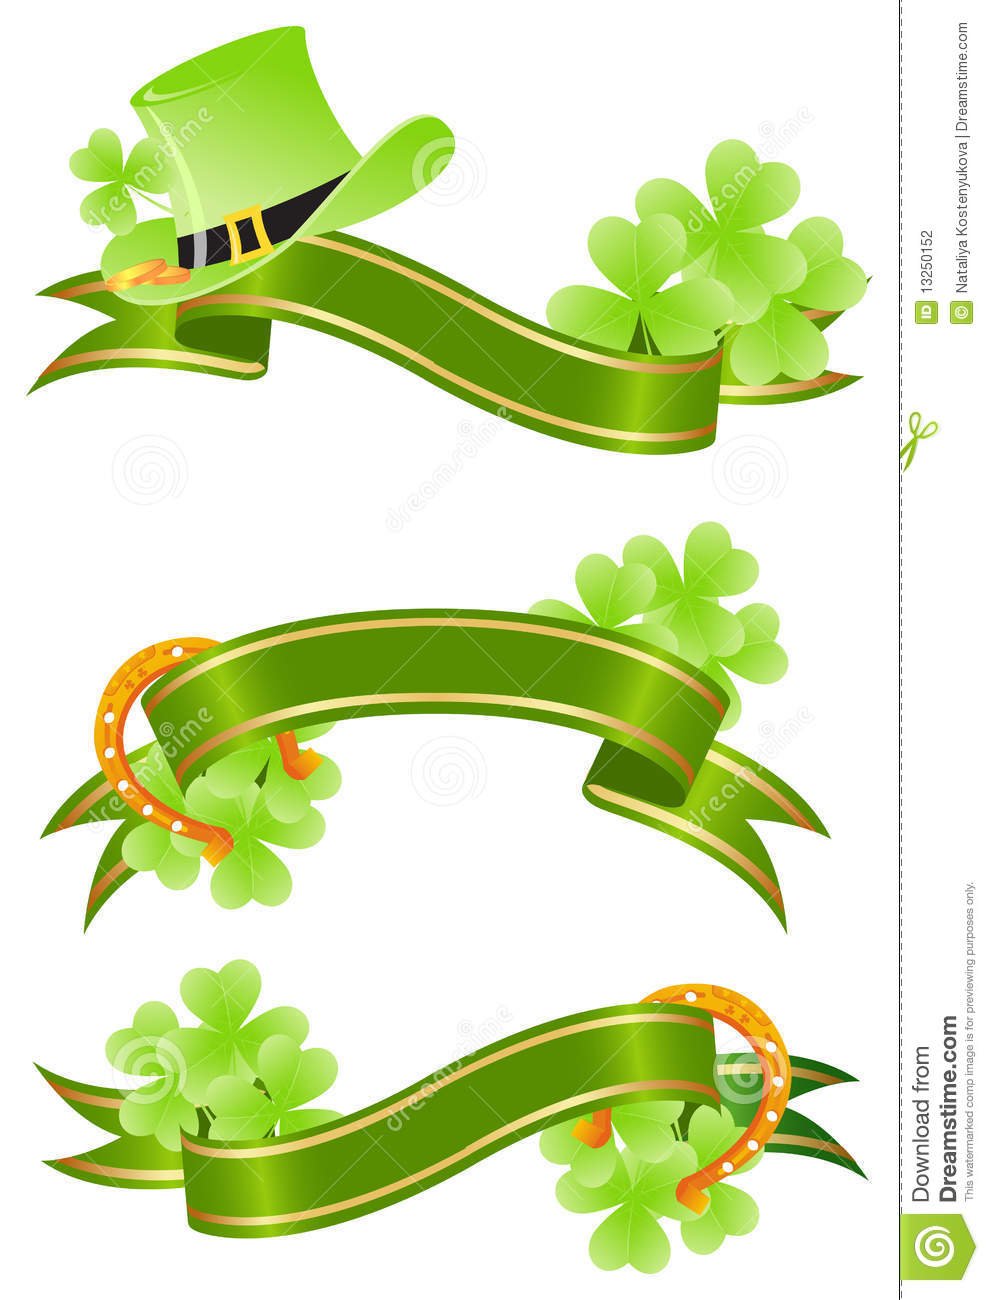 Three Green Placards With Tree Leaf Clovers And Golden Lucky Horseshoe